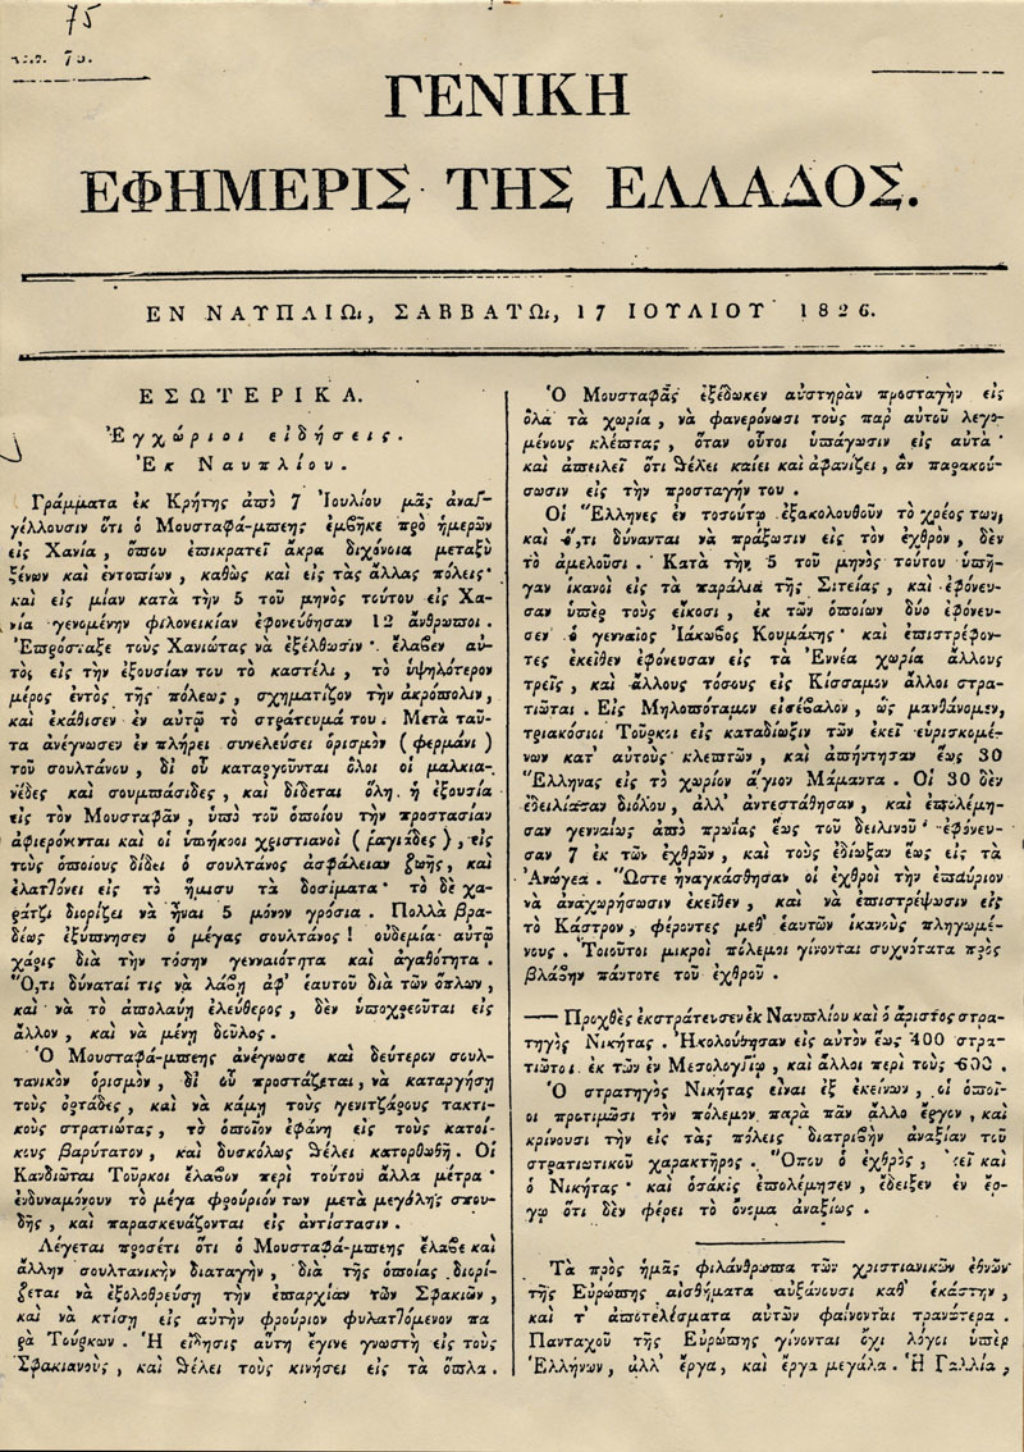 “General Newspaper of Greece”, 17 July 1826, with news from Crete